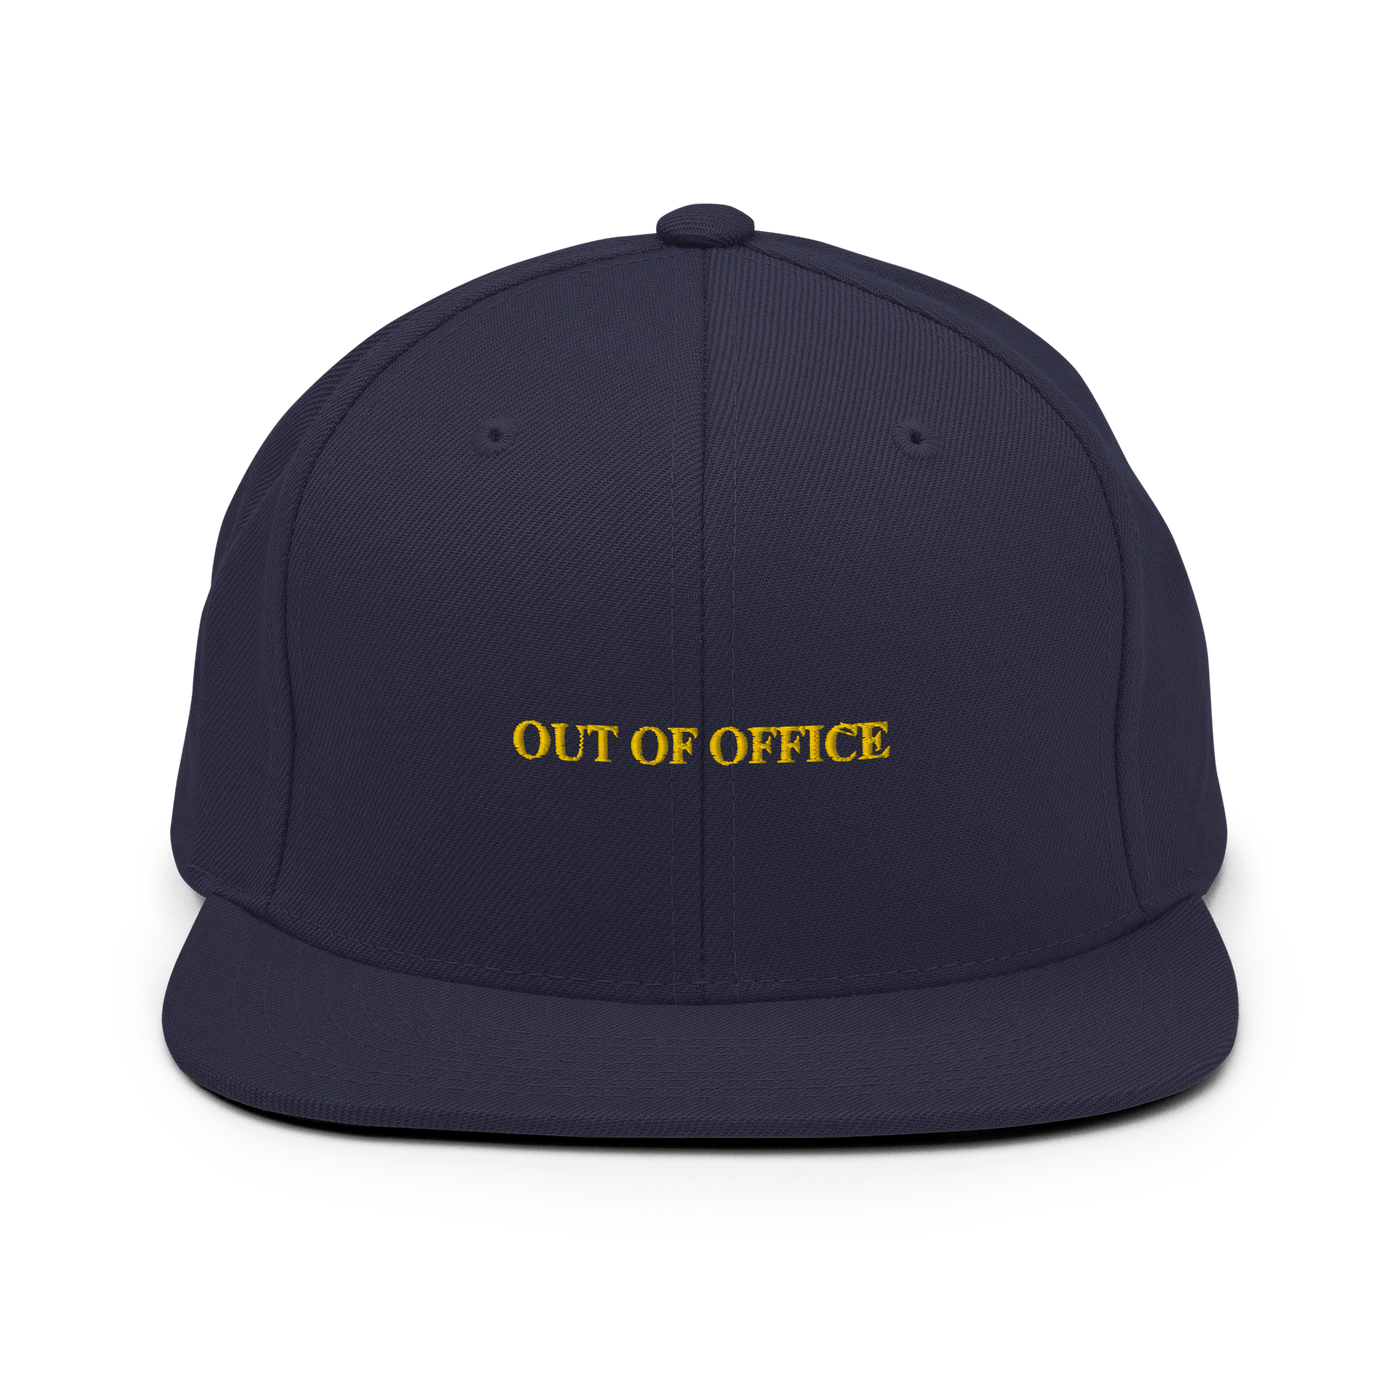 OUT OF OFFICE Snapback - Navy - - Just Another Cap Store